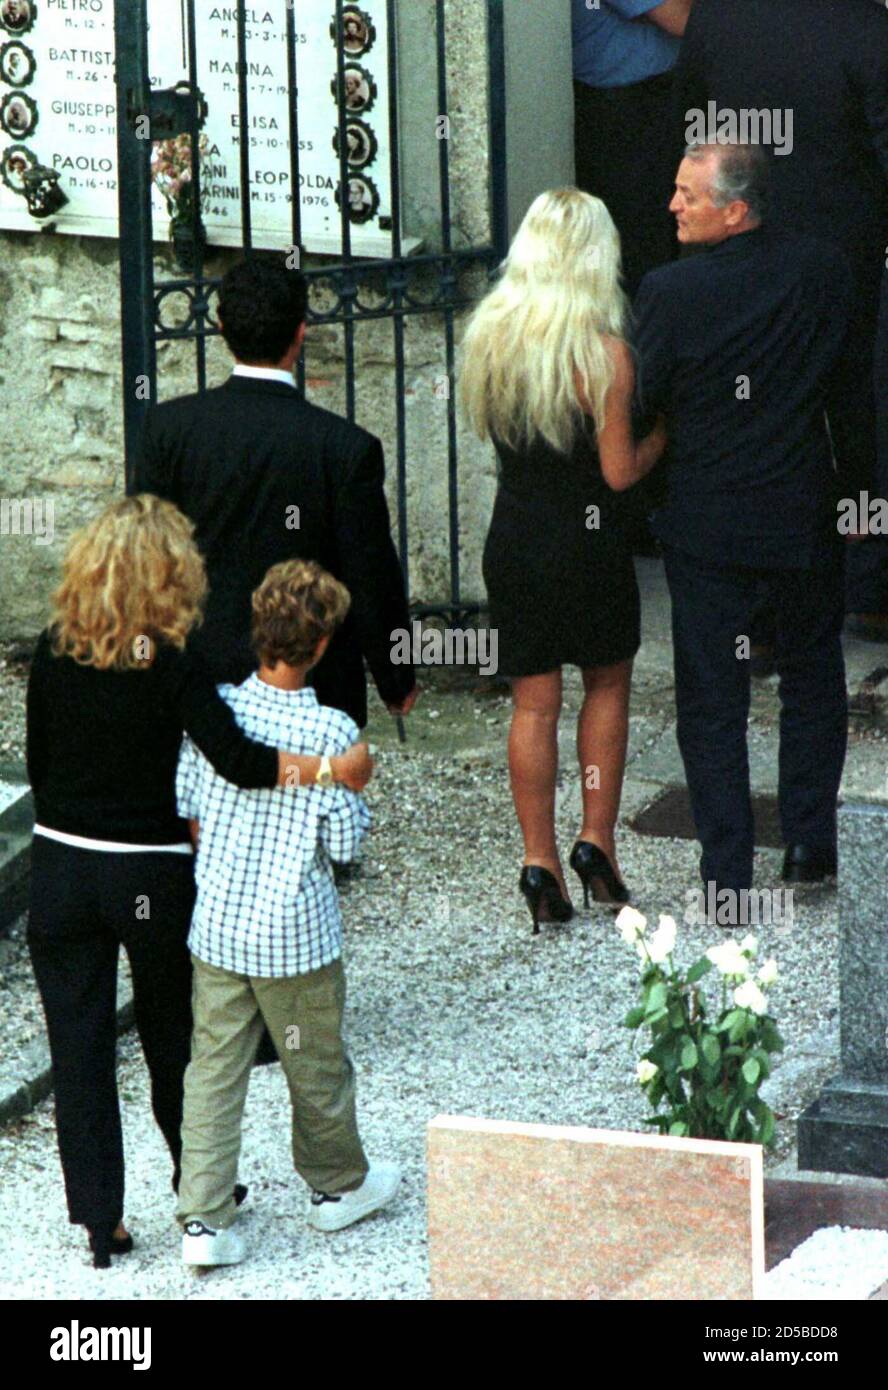 Santo Versace (R), brother of fashion designer Gianni Versace who was killed  outside his Miami home on Tuesday, embraces Donatella Versace, sister of  Gianni, at the end of a private ceremony with